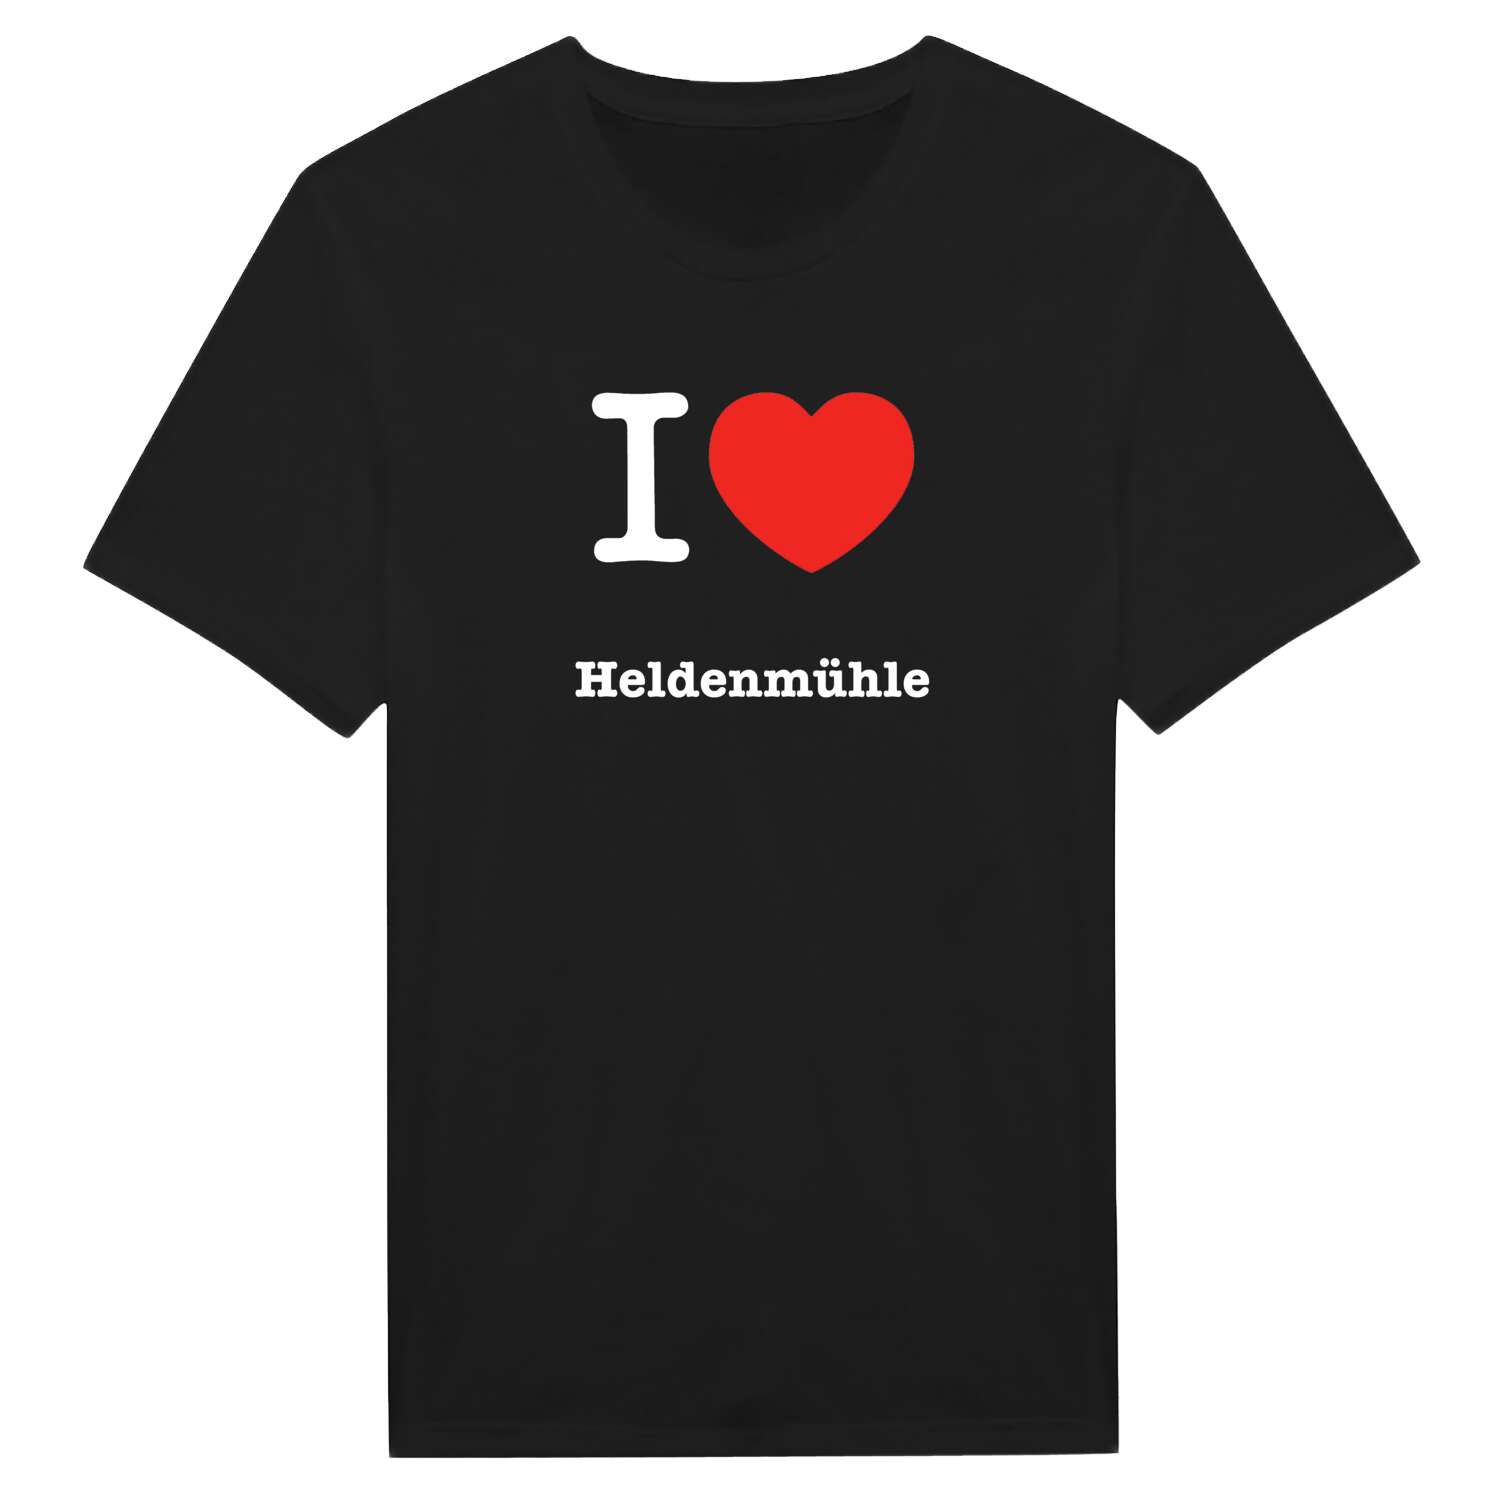 Heldenmühle T-Shirt »I love«